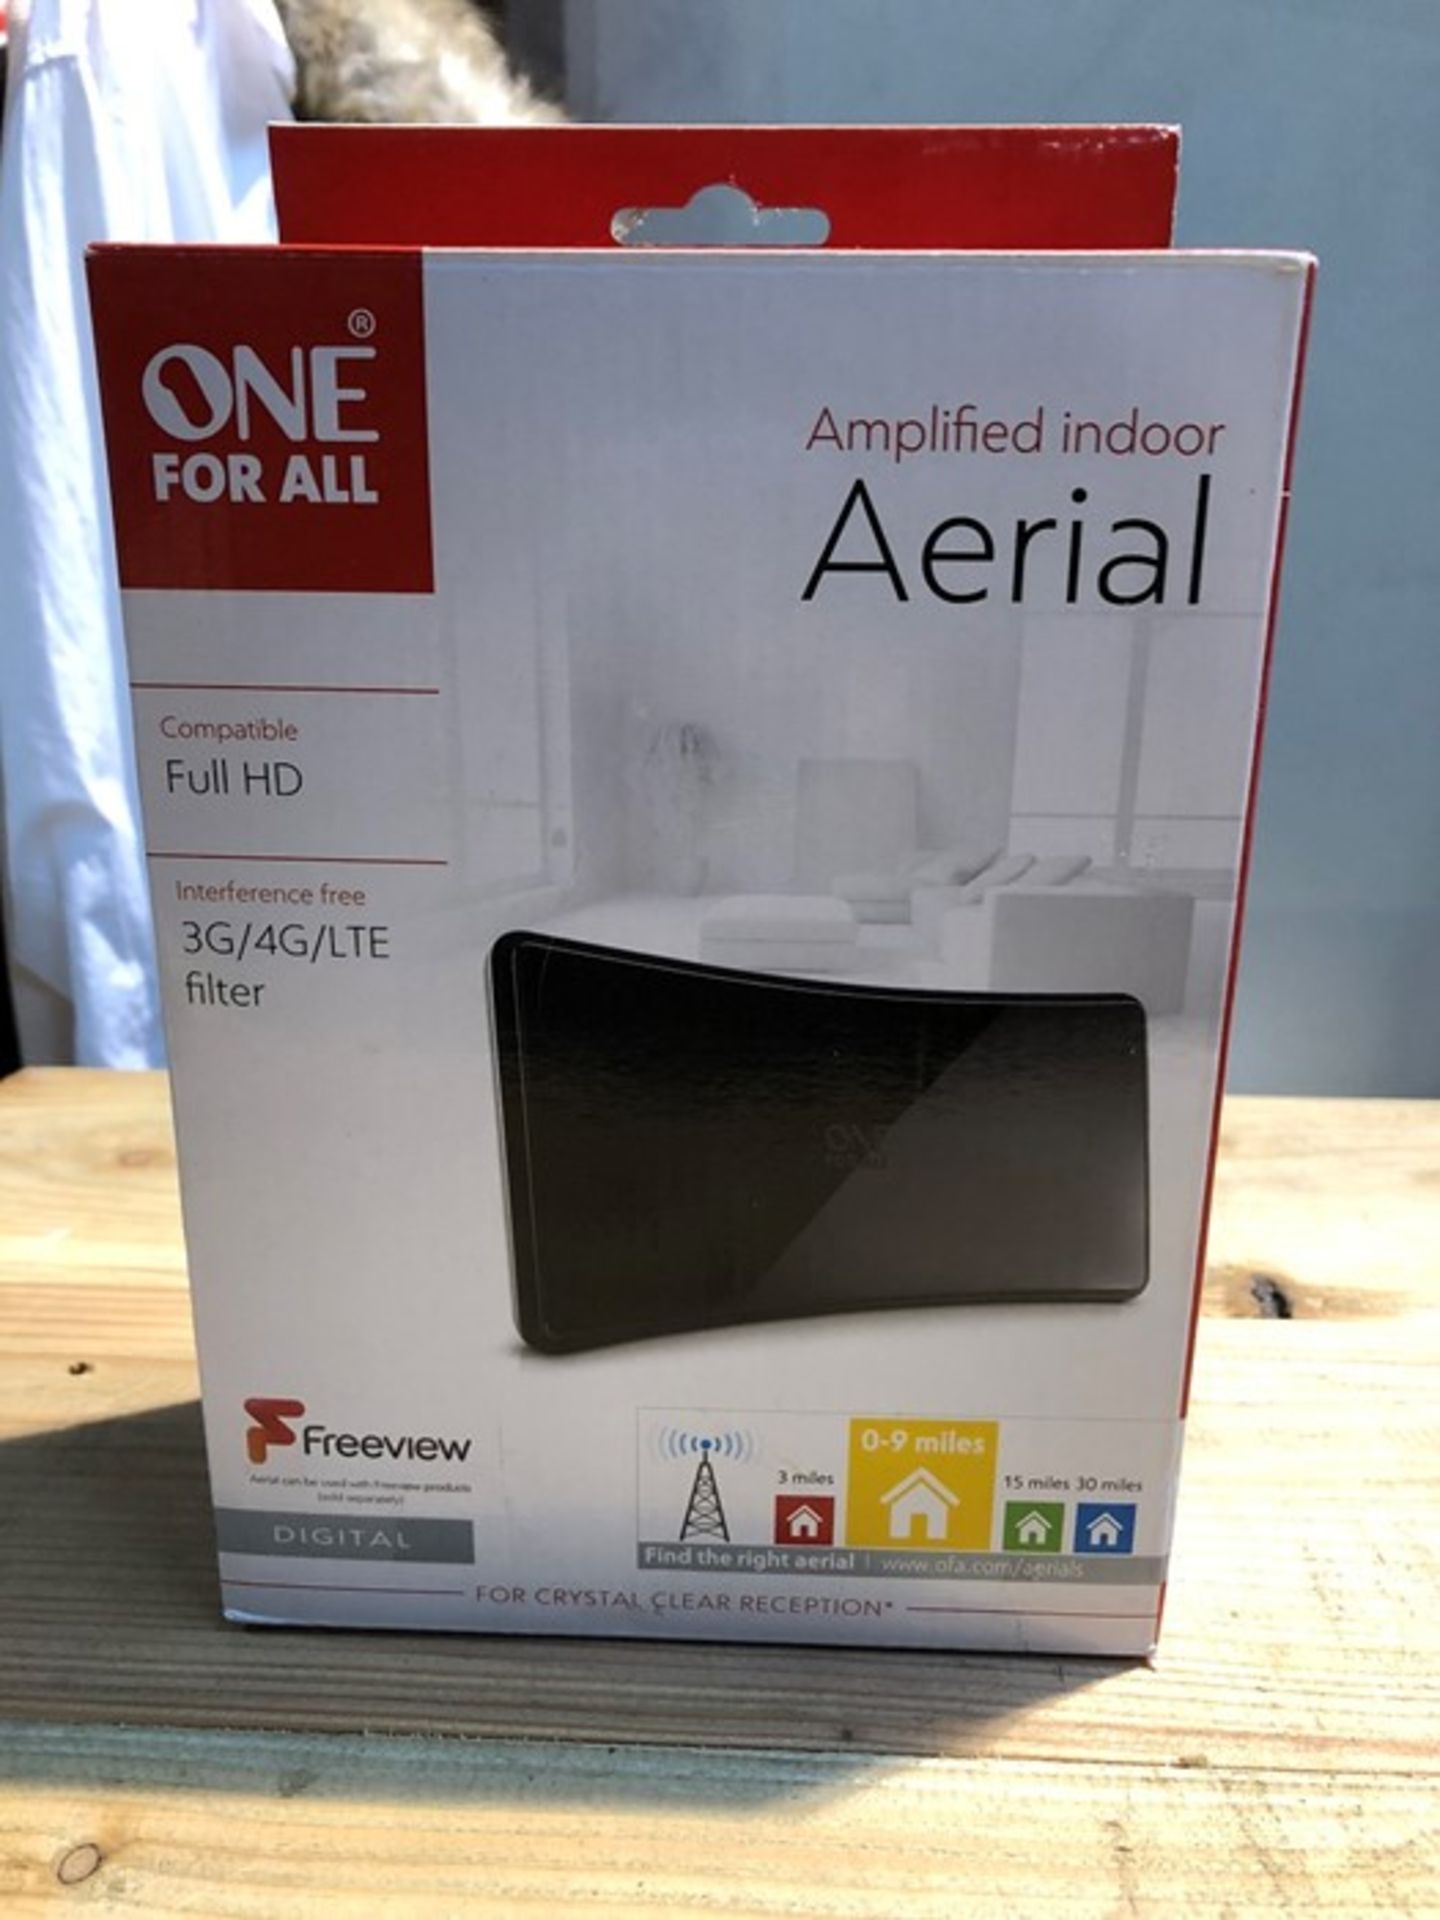 1 LOT TO CONTAIN 2 BOXED ONE FOR ALL FULL HD CURVED AMPLIFIED INDOOR AERIAL - SV9420 / RRP £33.